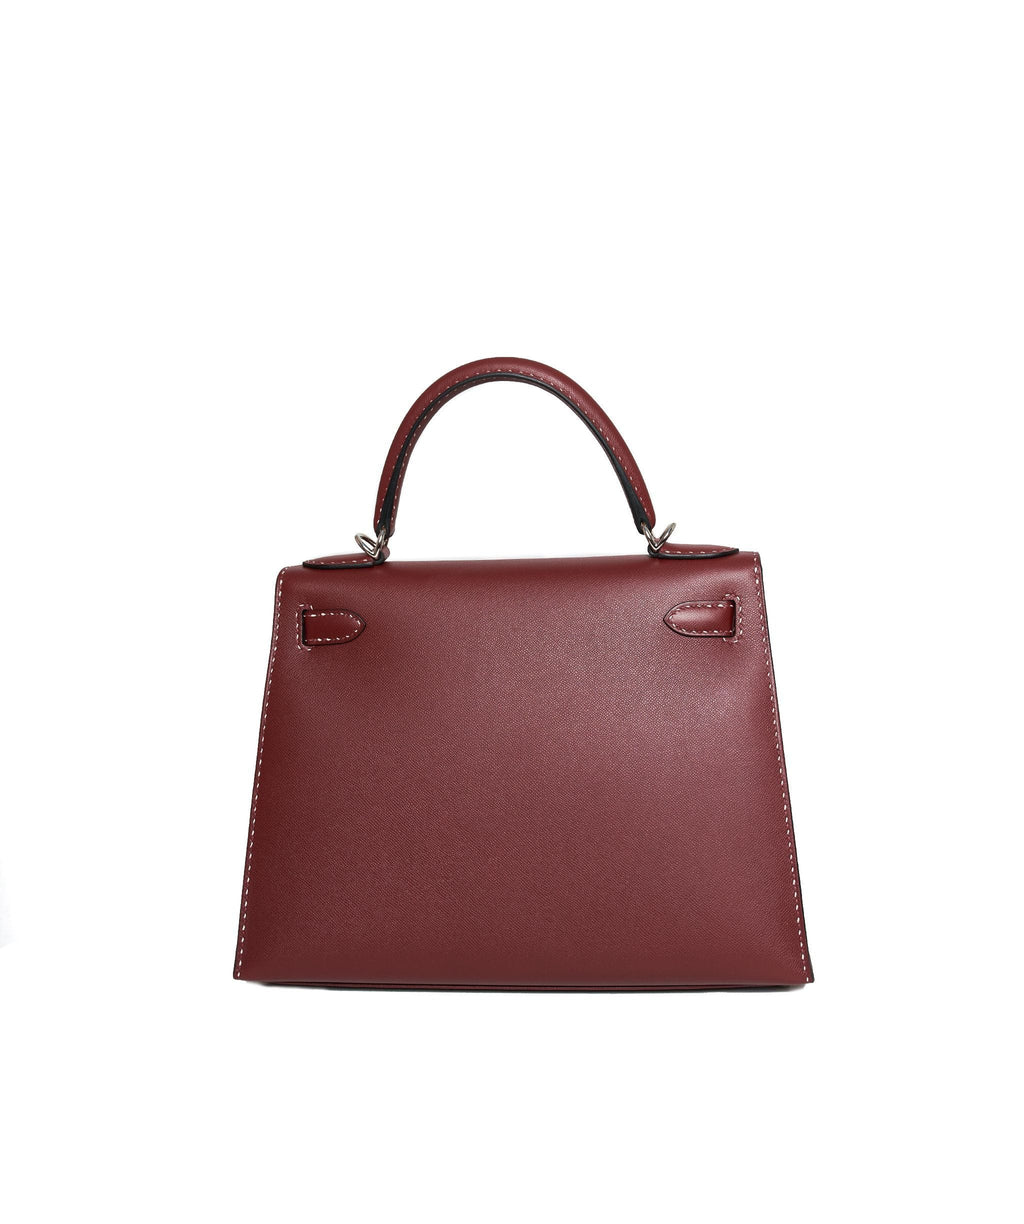 Hermès Kelly 28 Sellier Red Rouge Chèvre Mysore Leather Bag - Chelsea  Vintage Couture